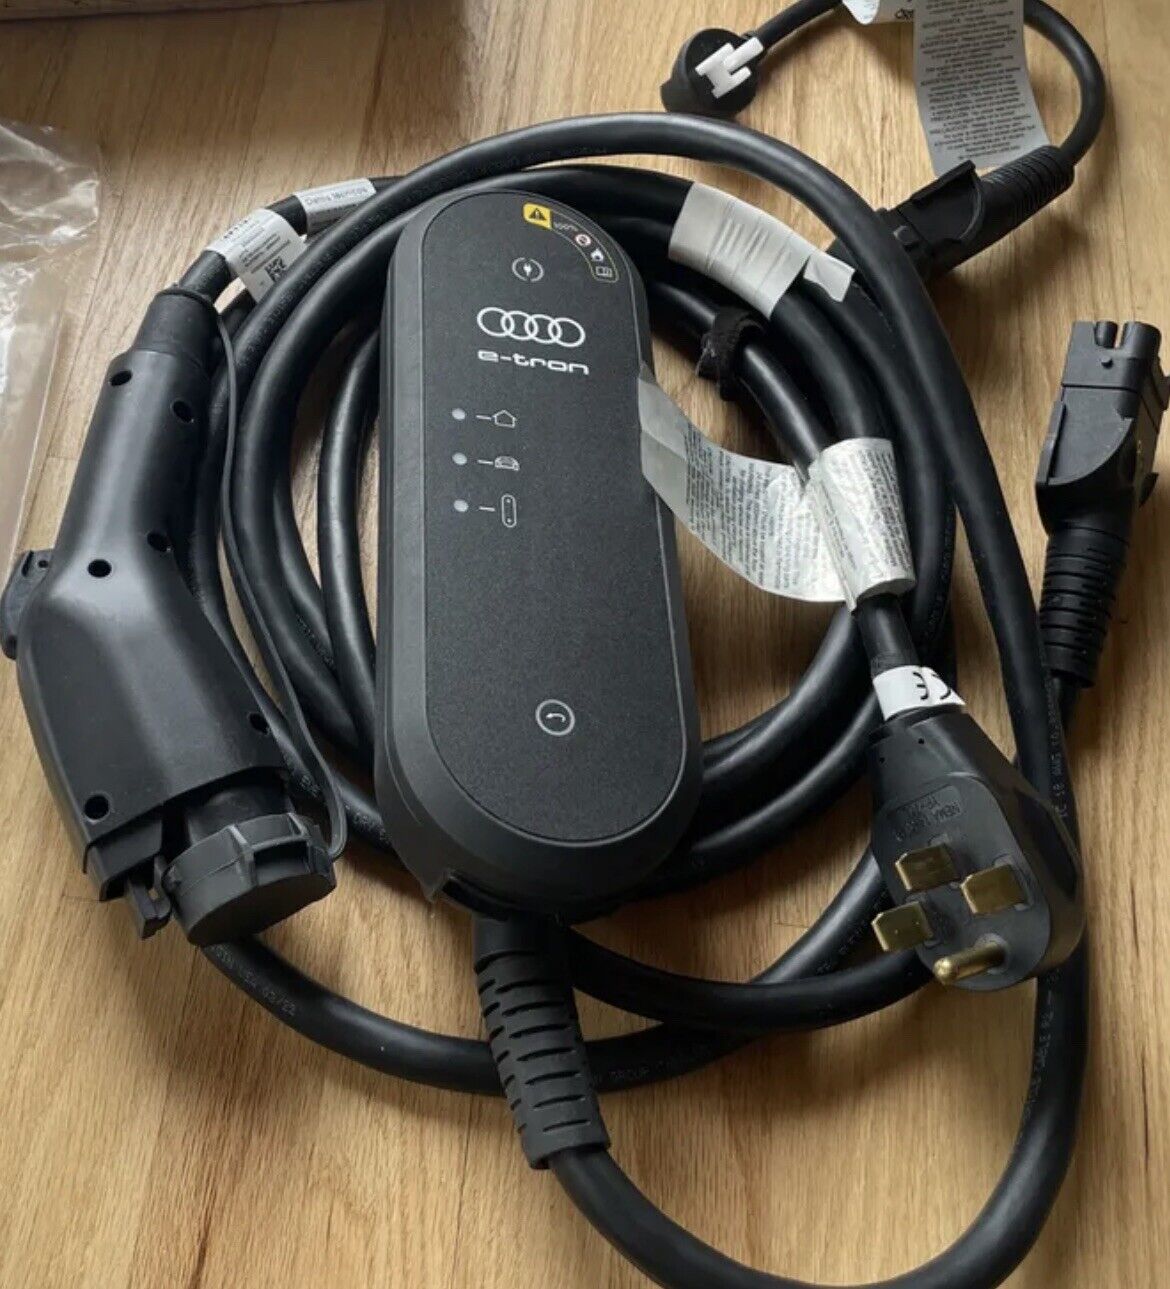 Audi E-tron Compact EV Charger - Audi (V04-017-001-DH) Charging Cable Cord OEM